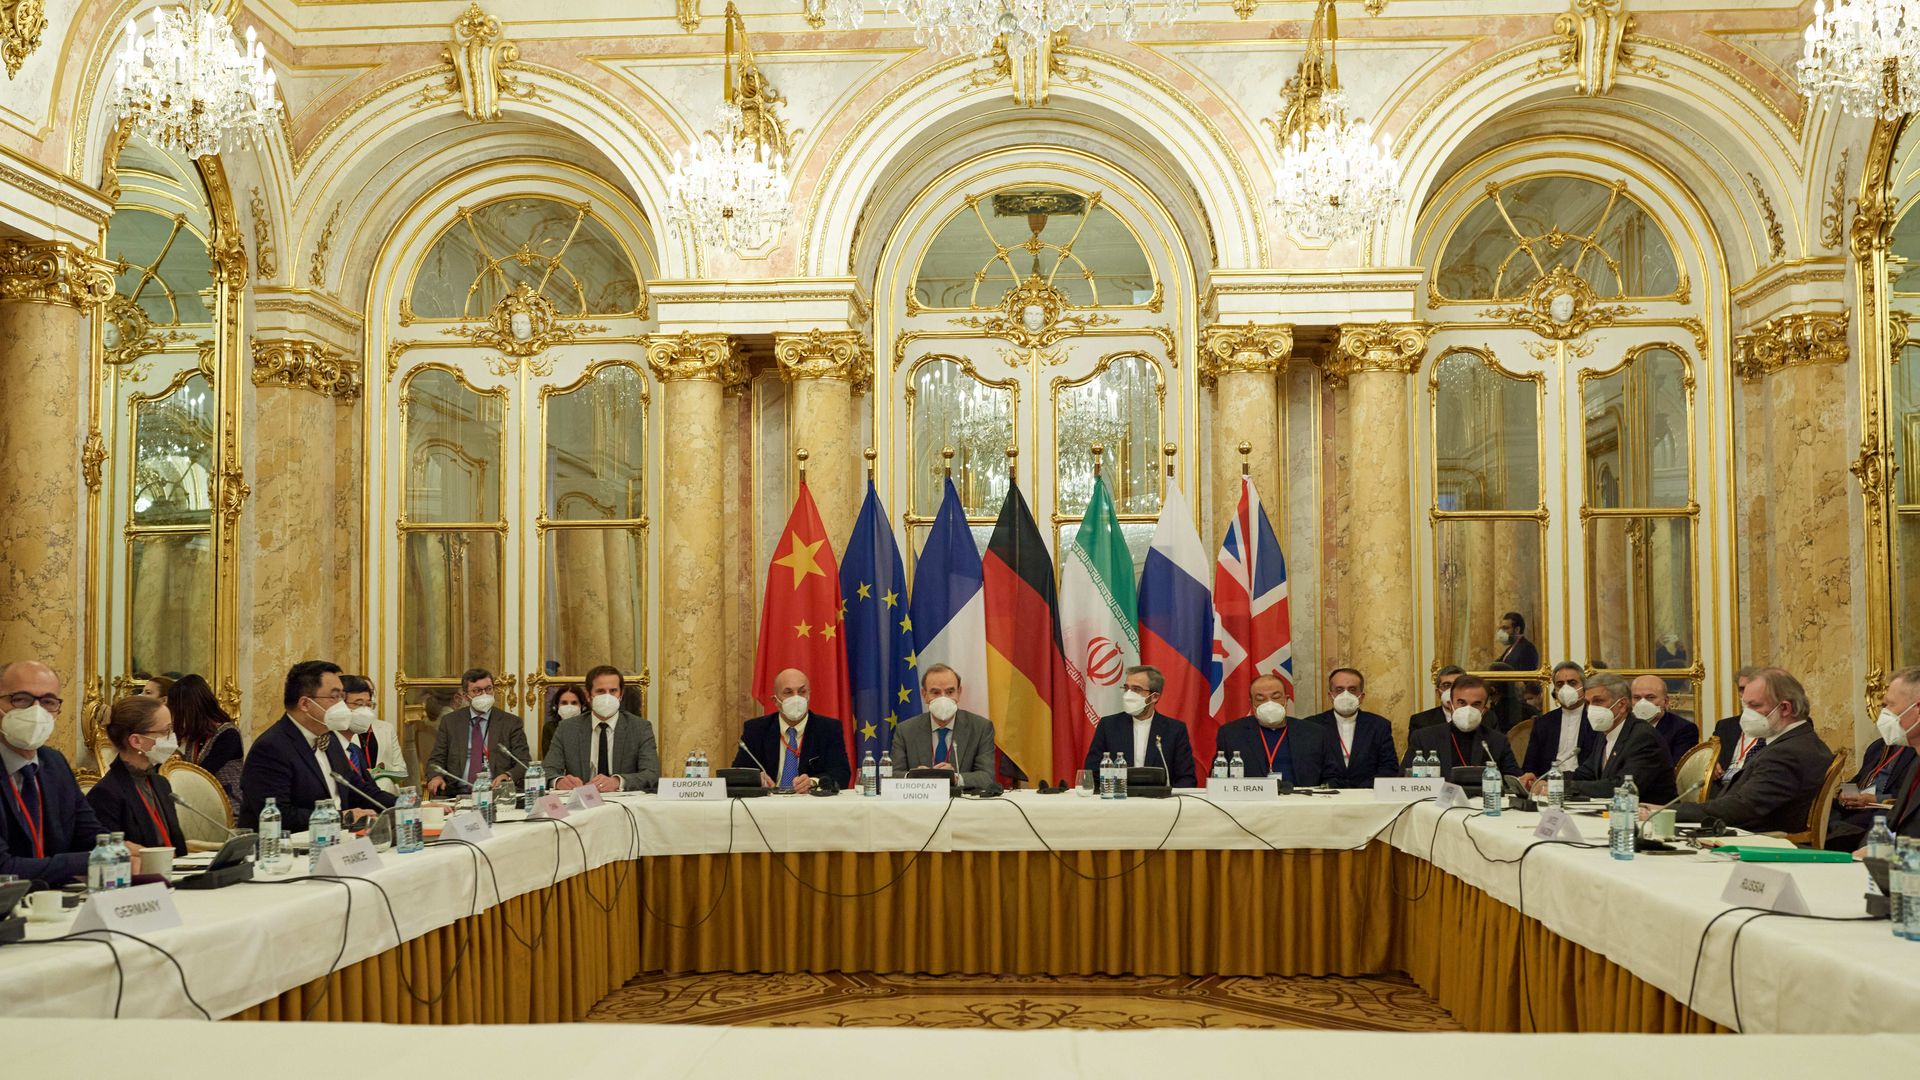 Officials are seen sitting in a Vienna hotel ballroom during the first day of the latest round in nuclear talks with Iran.